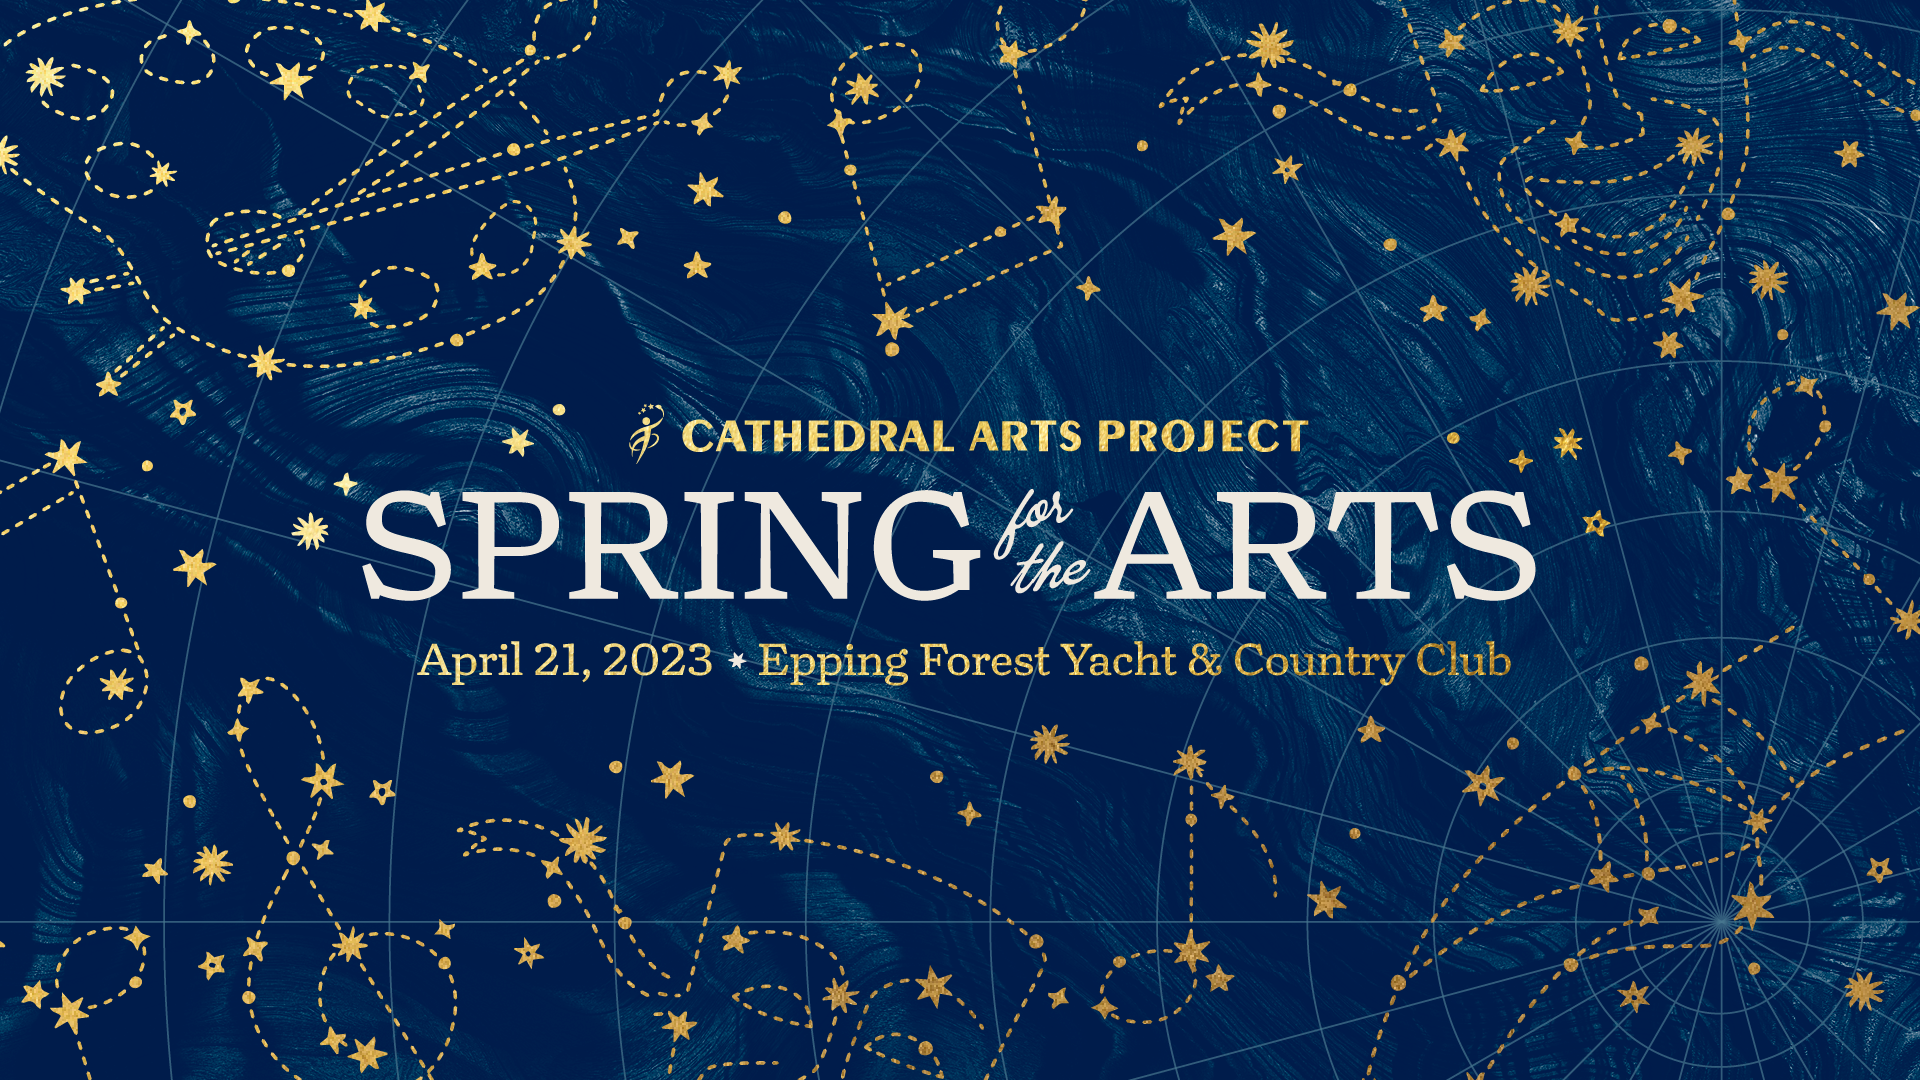 18th annual Spring for the Arts design with stars